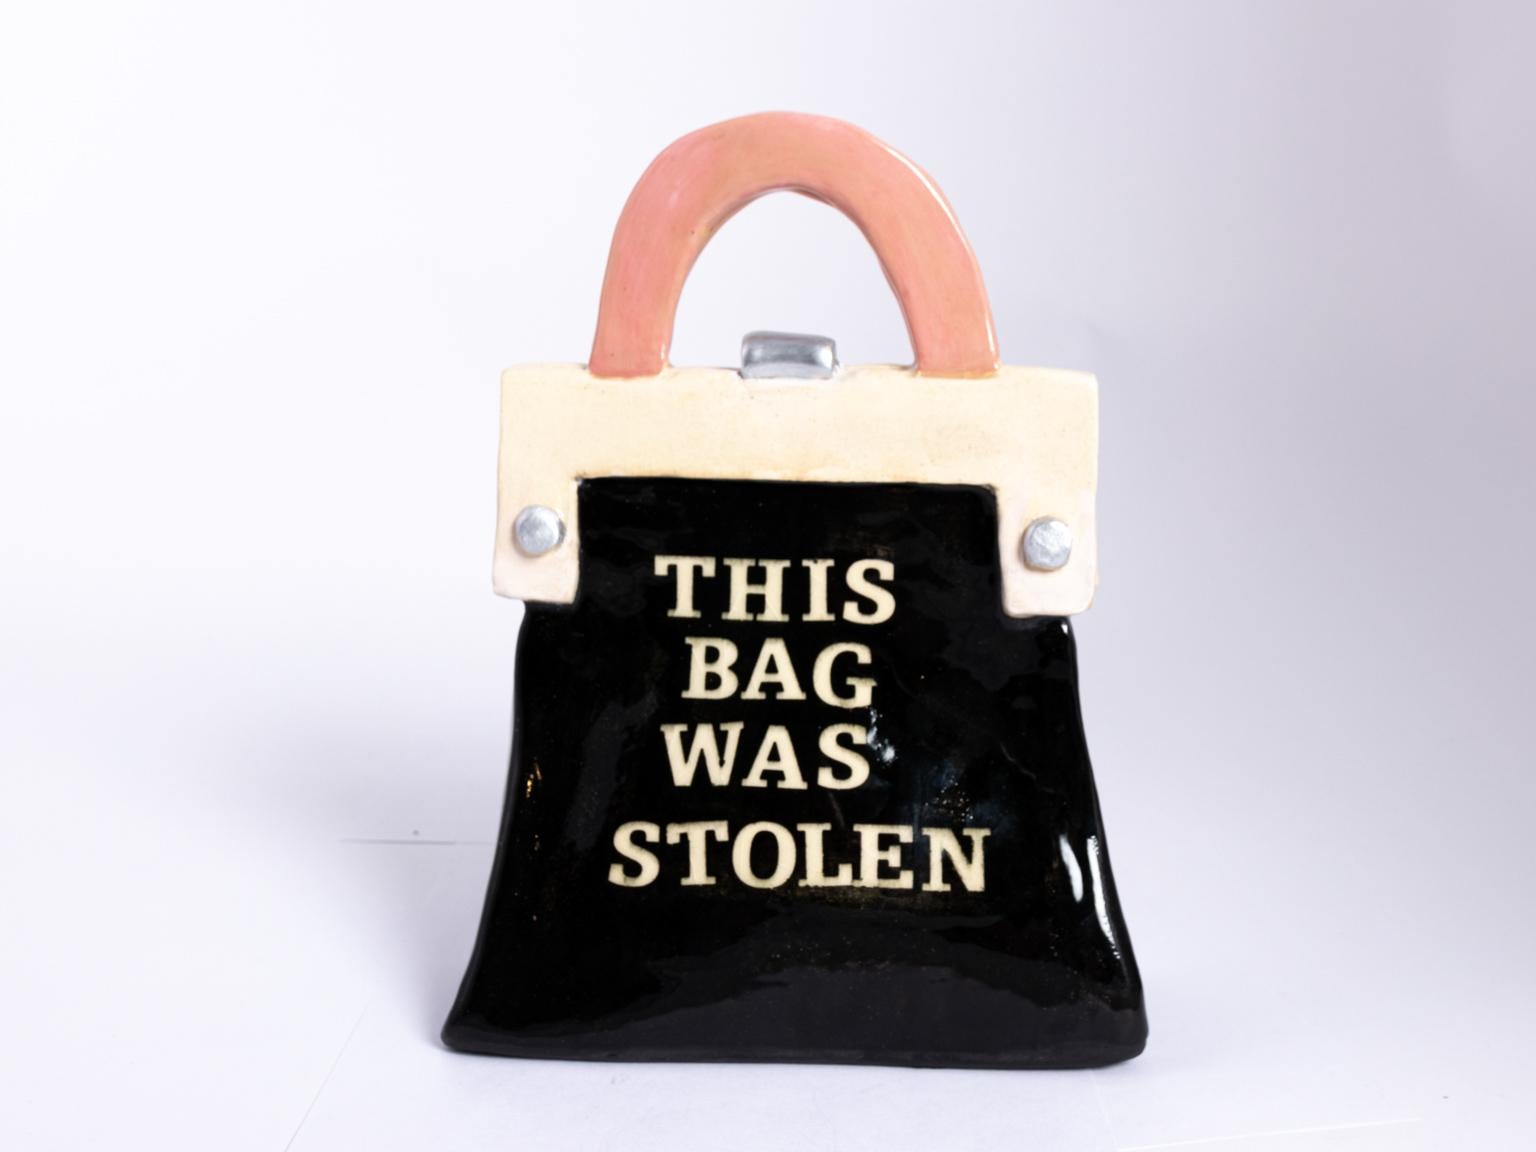 Ceramic, paper, clay hand-built pocketbook sculpture inspired by Perrin, Paris, circa 2019. Made in the United States. The piece features text that reads 